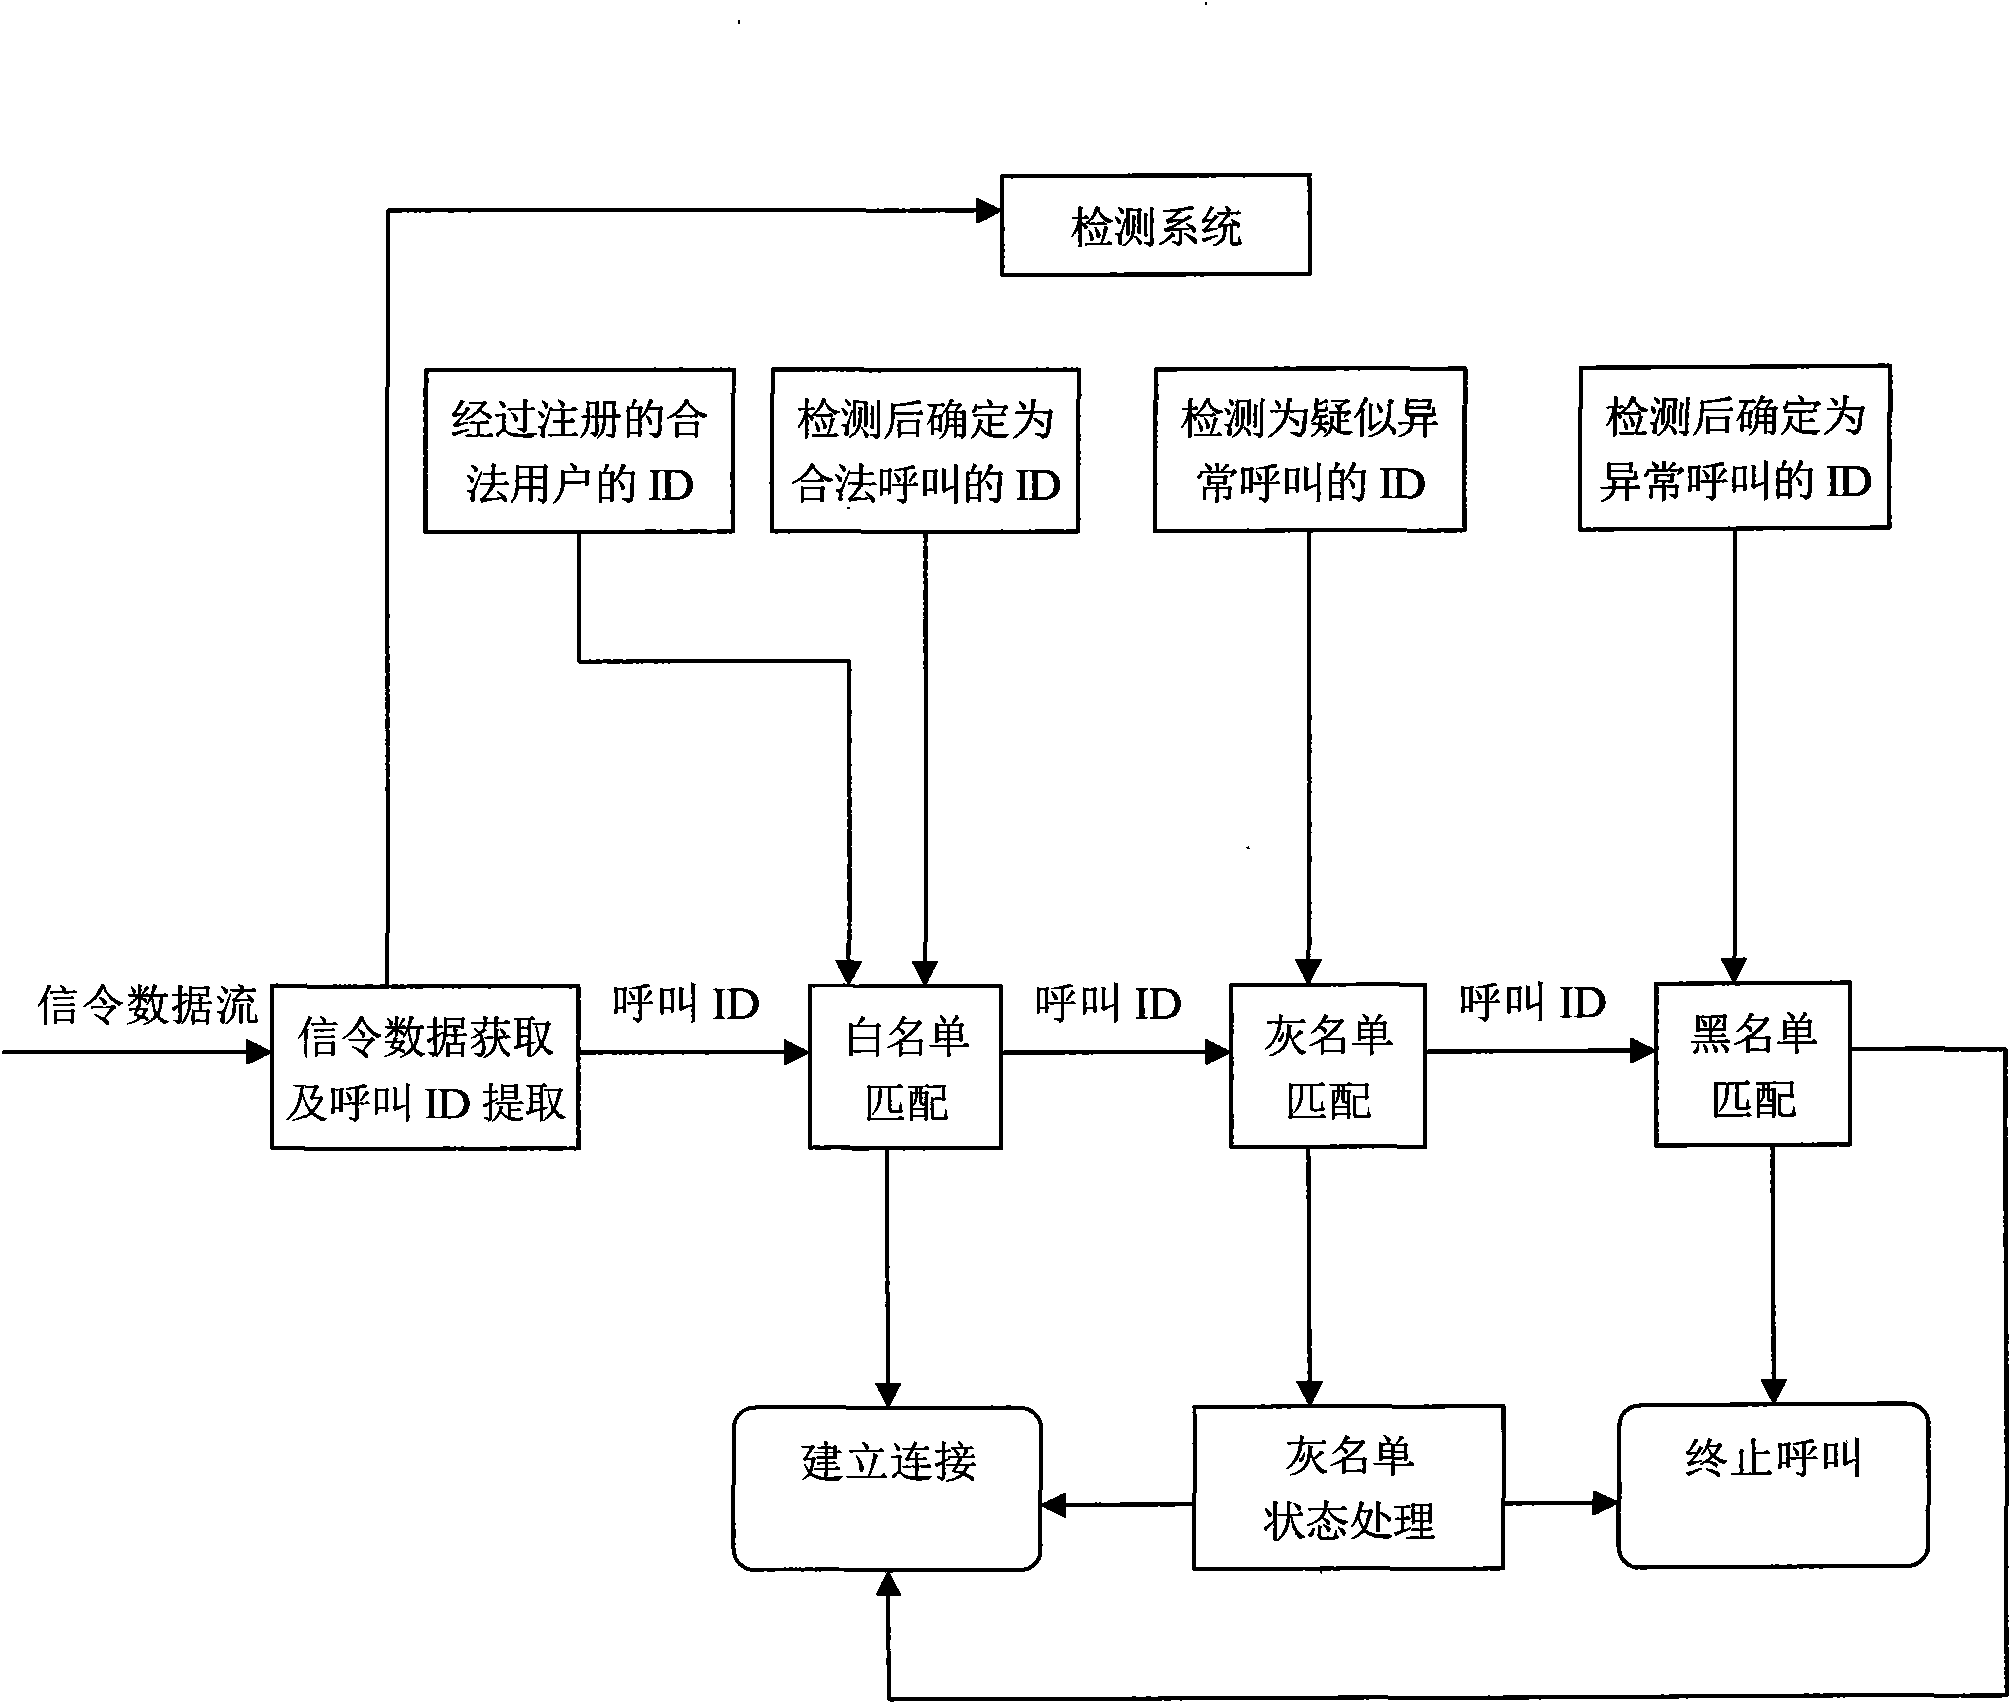 Method for filtering abnormal call based on multiple lists